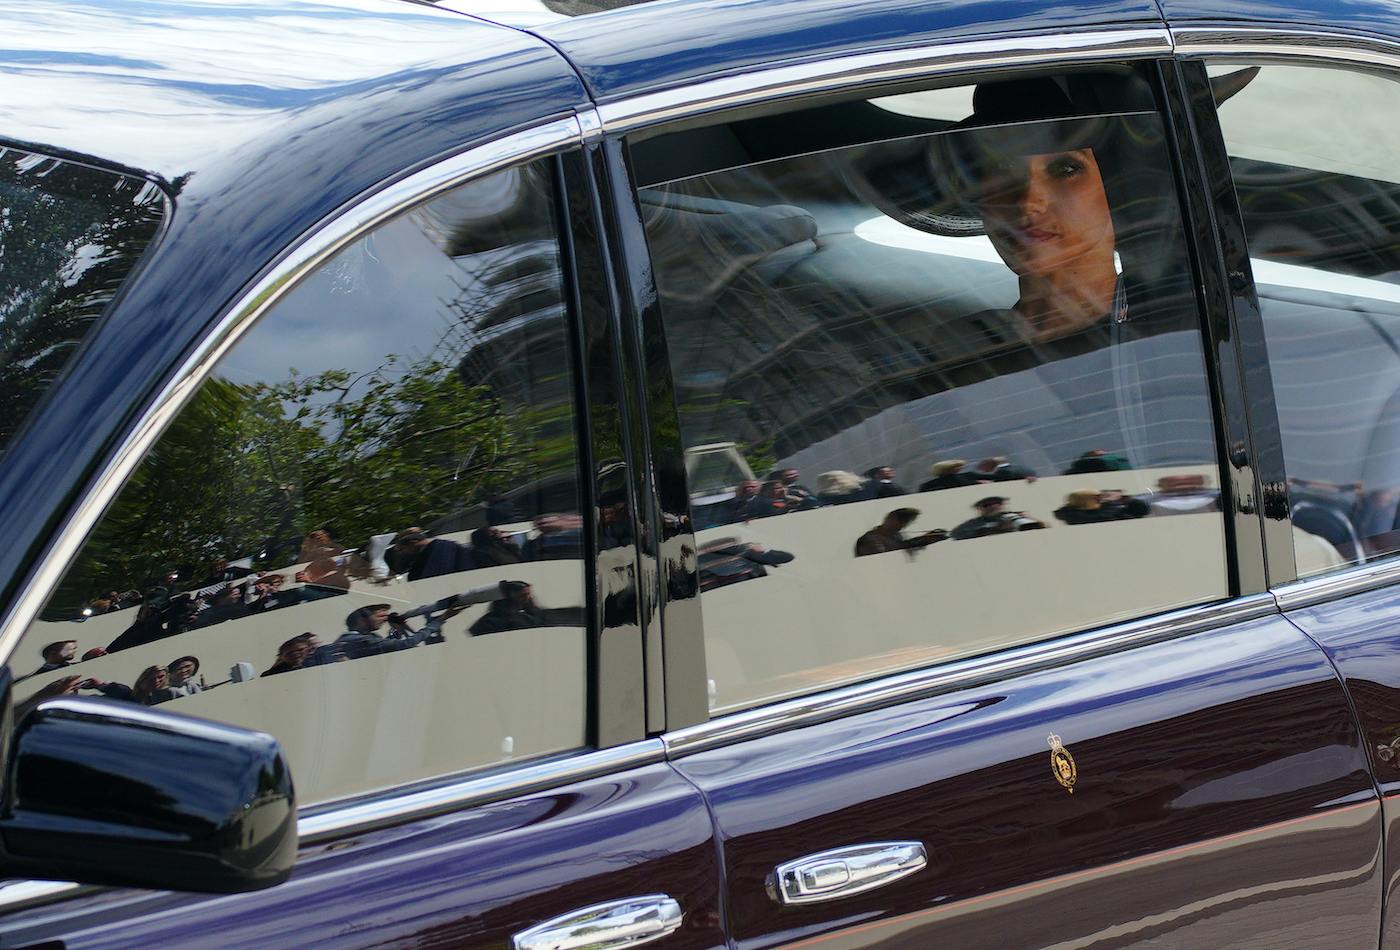 The Duchess of Sussex, Meghan Markle rides in a car 